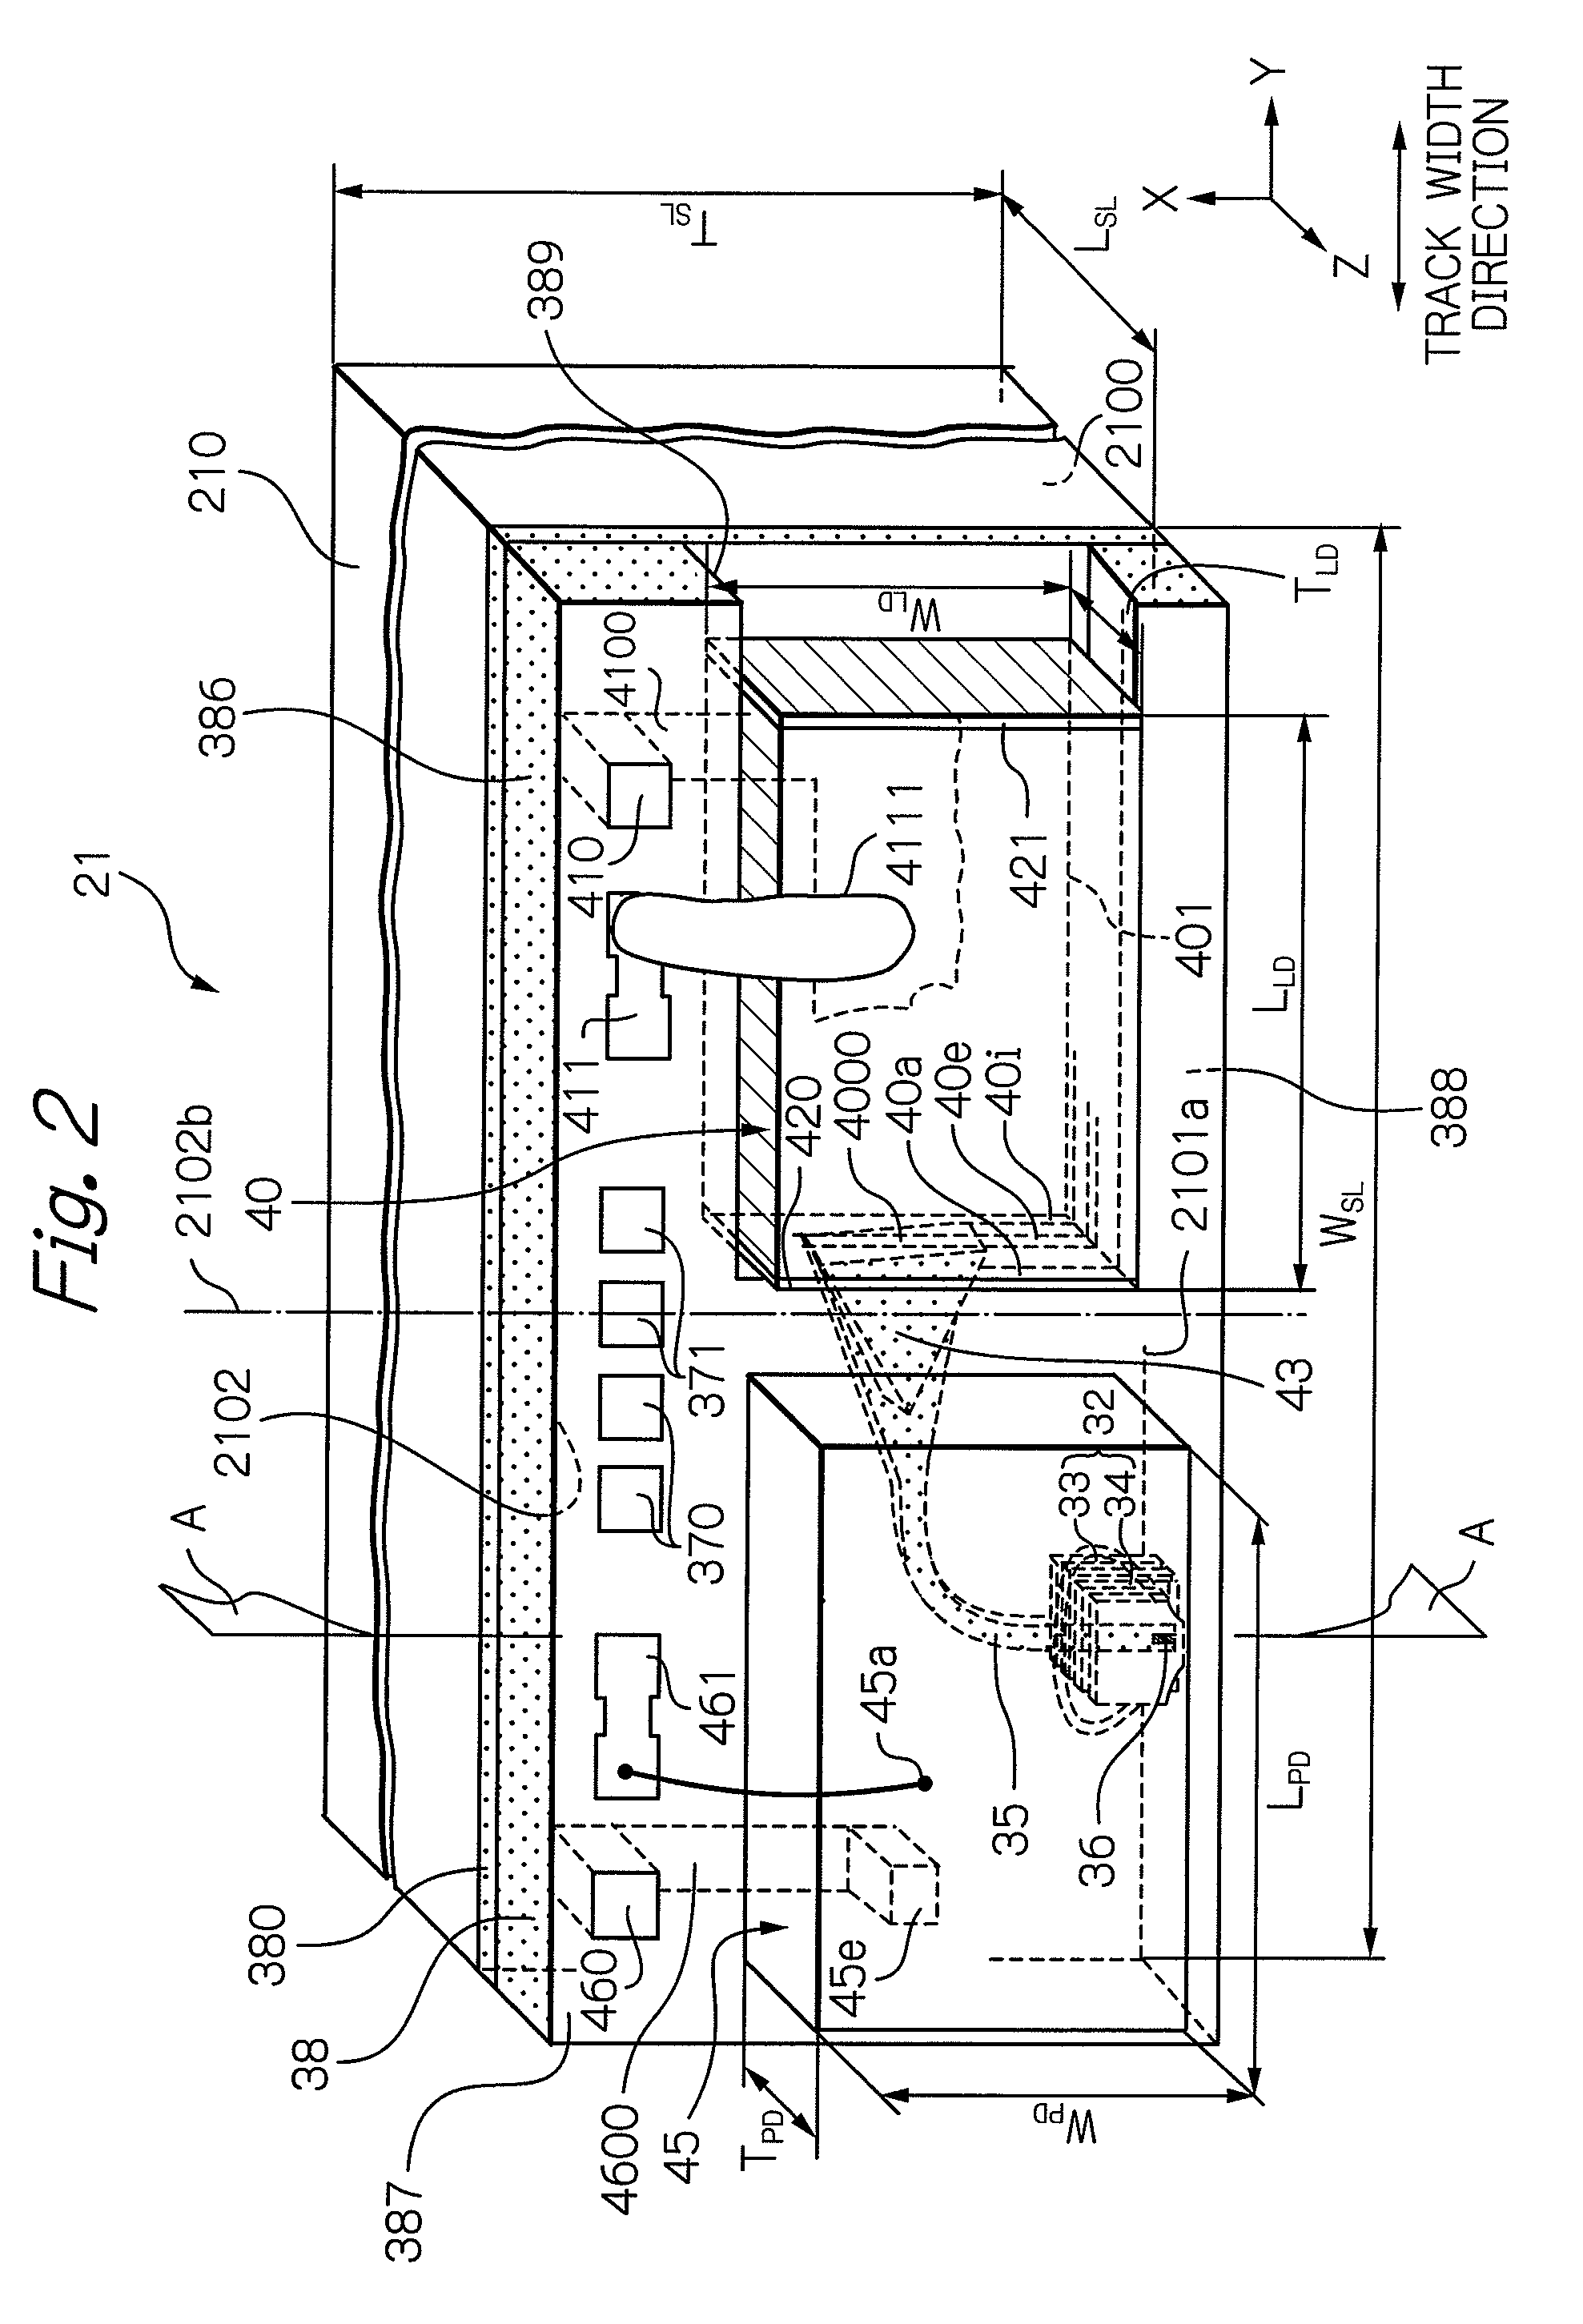 Thermally-assisted magnetic recording head with light detector in element-integration surface